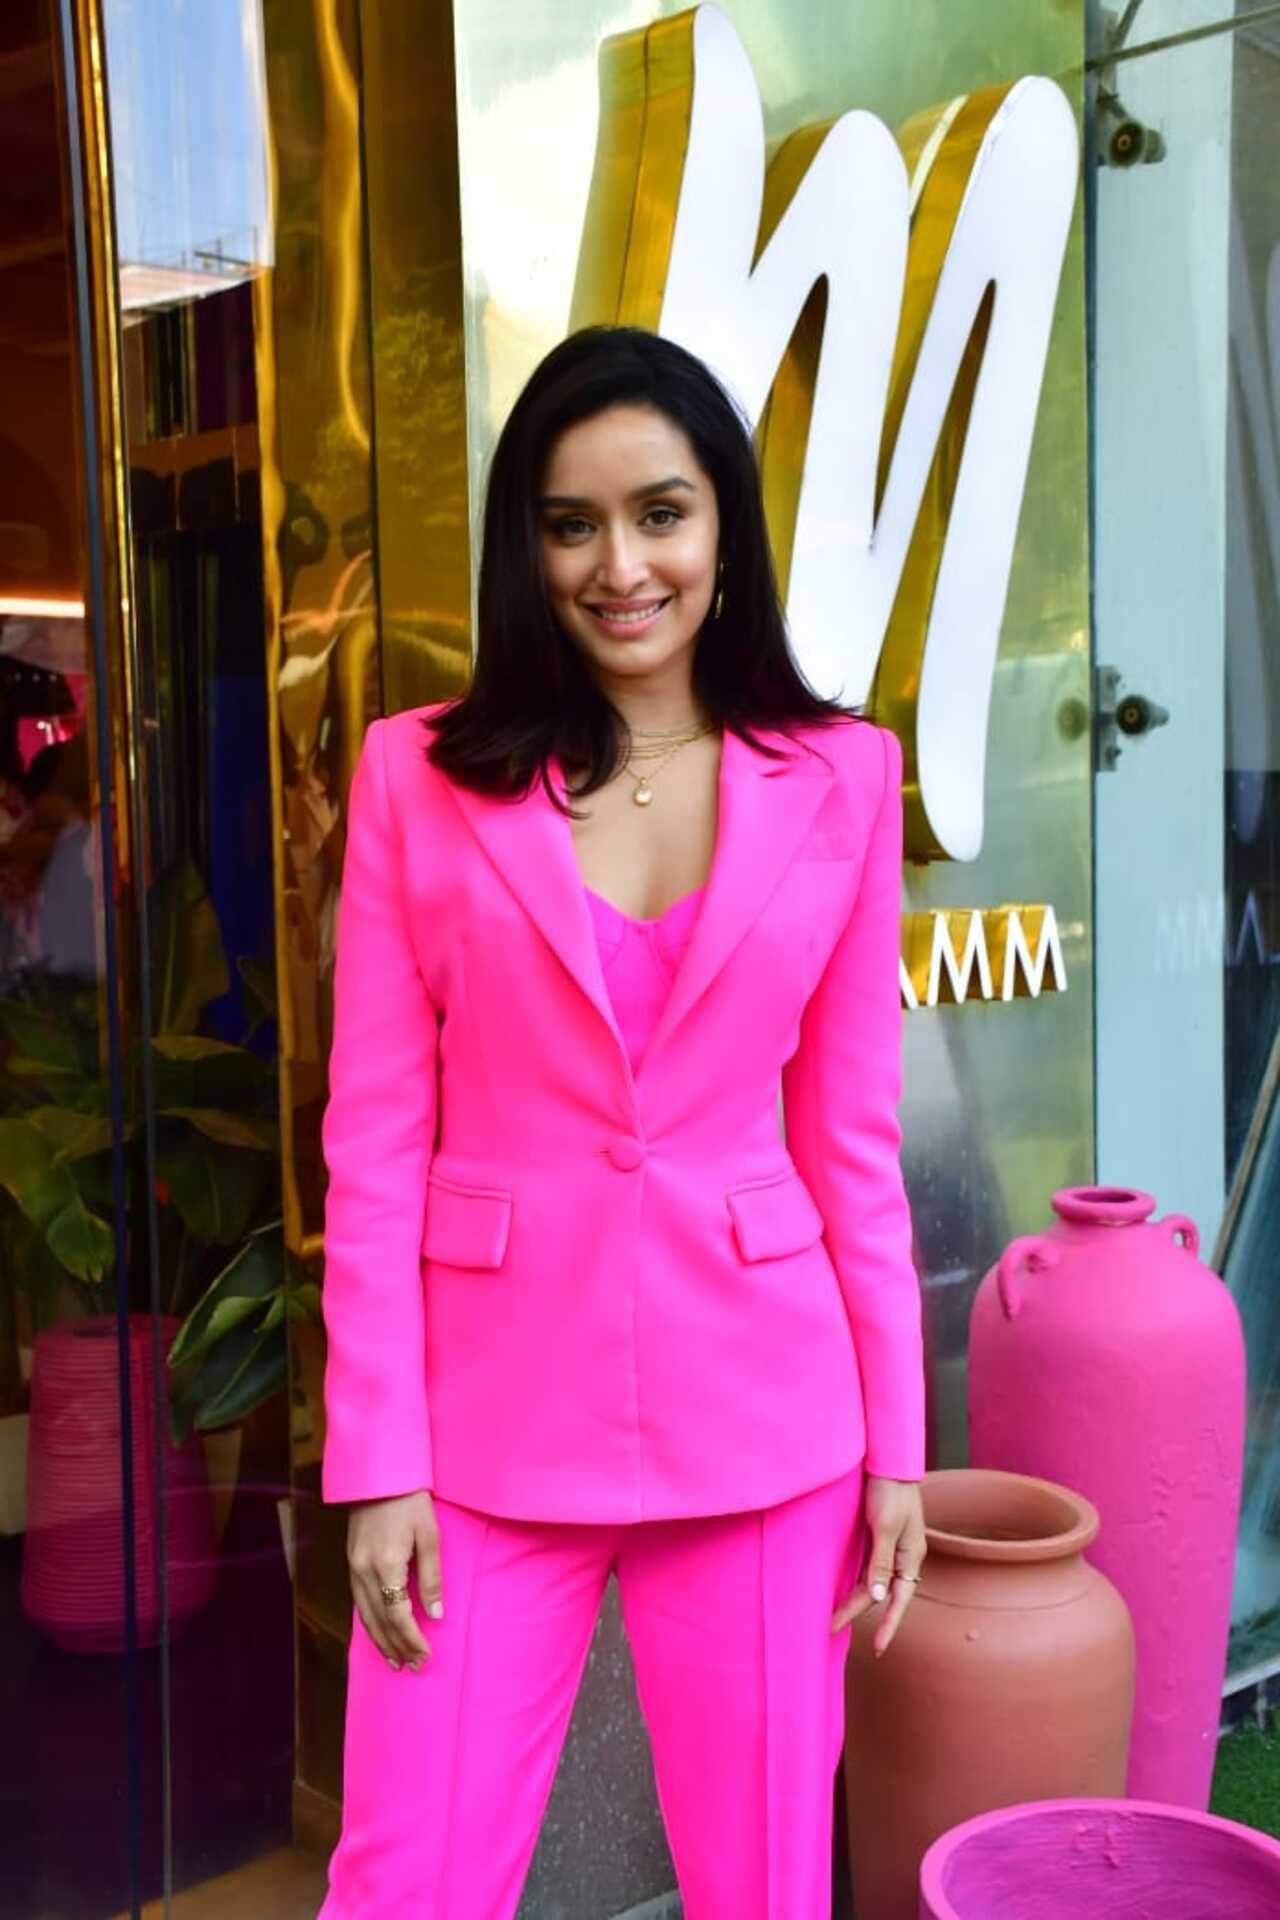 Shraddha Kapoor was also glammed up in a pink pantsuit for an event in the city